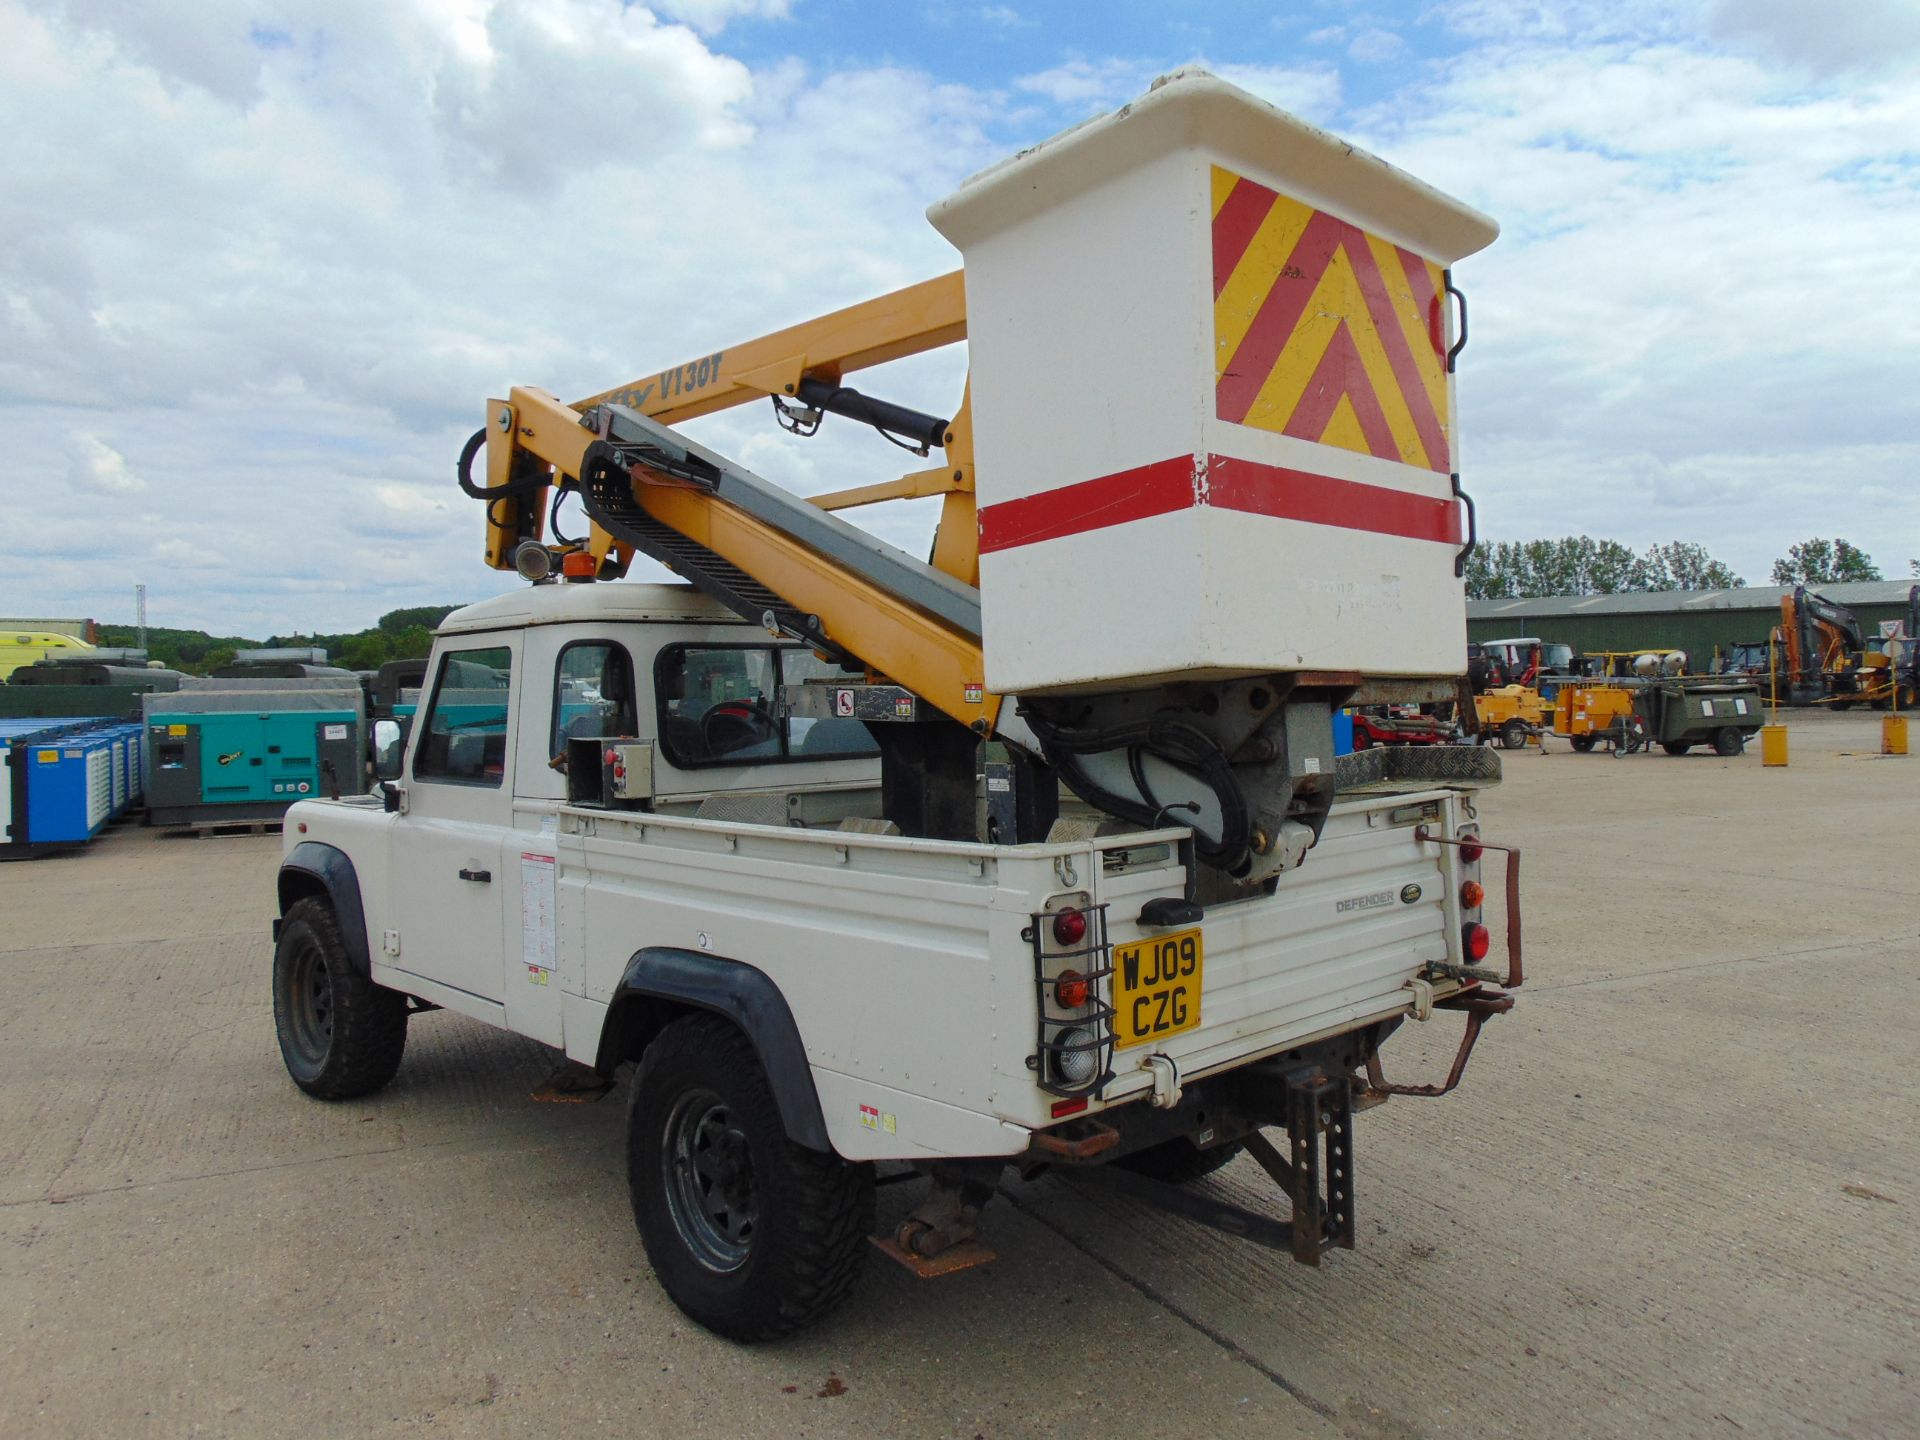 Land Rover Defender 110 High Capacity Cherry Picker - Image 8 of 23